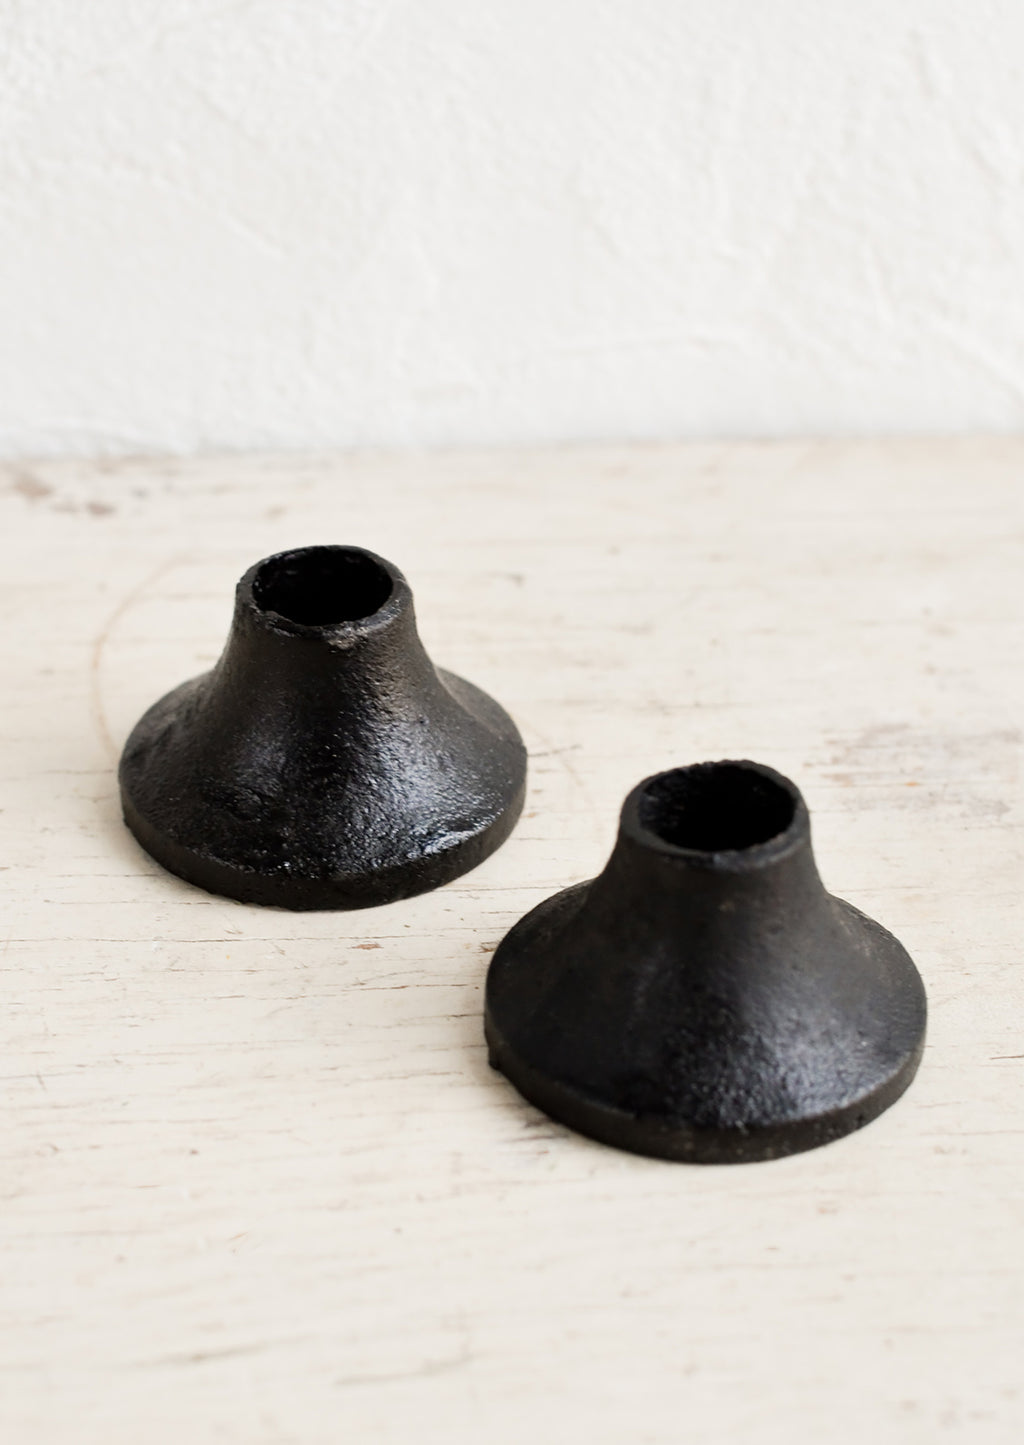 1: Two ceramic taper candle holders in black cast iron.